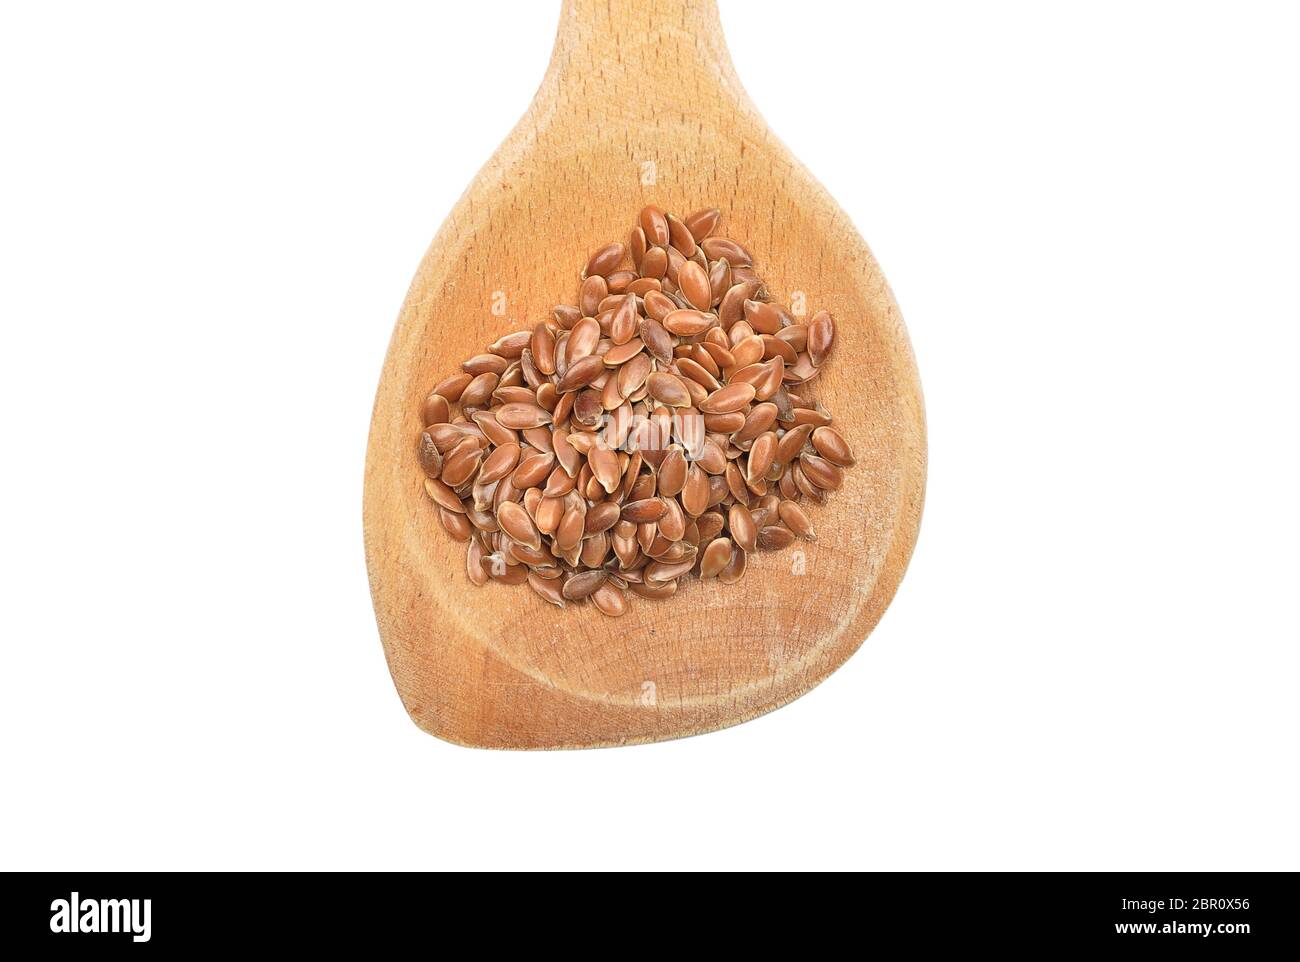 Linseed on wooden spoon and white background Stock Photo